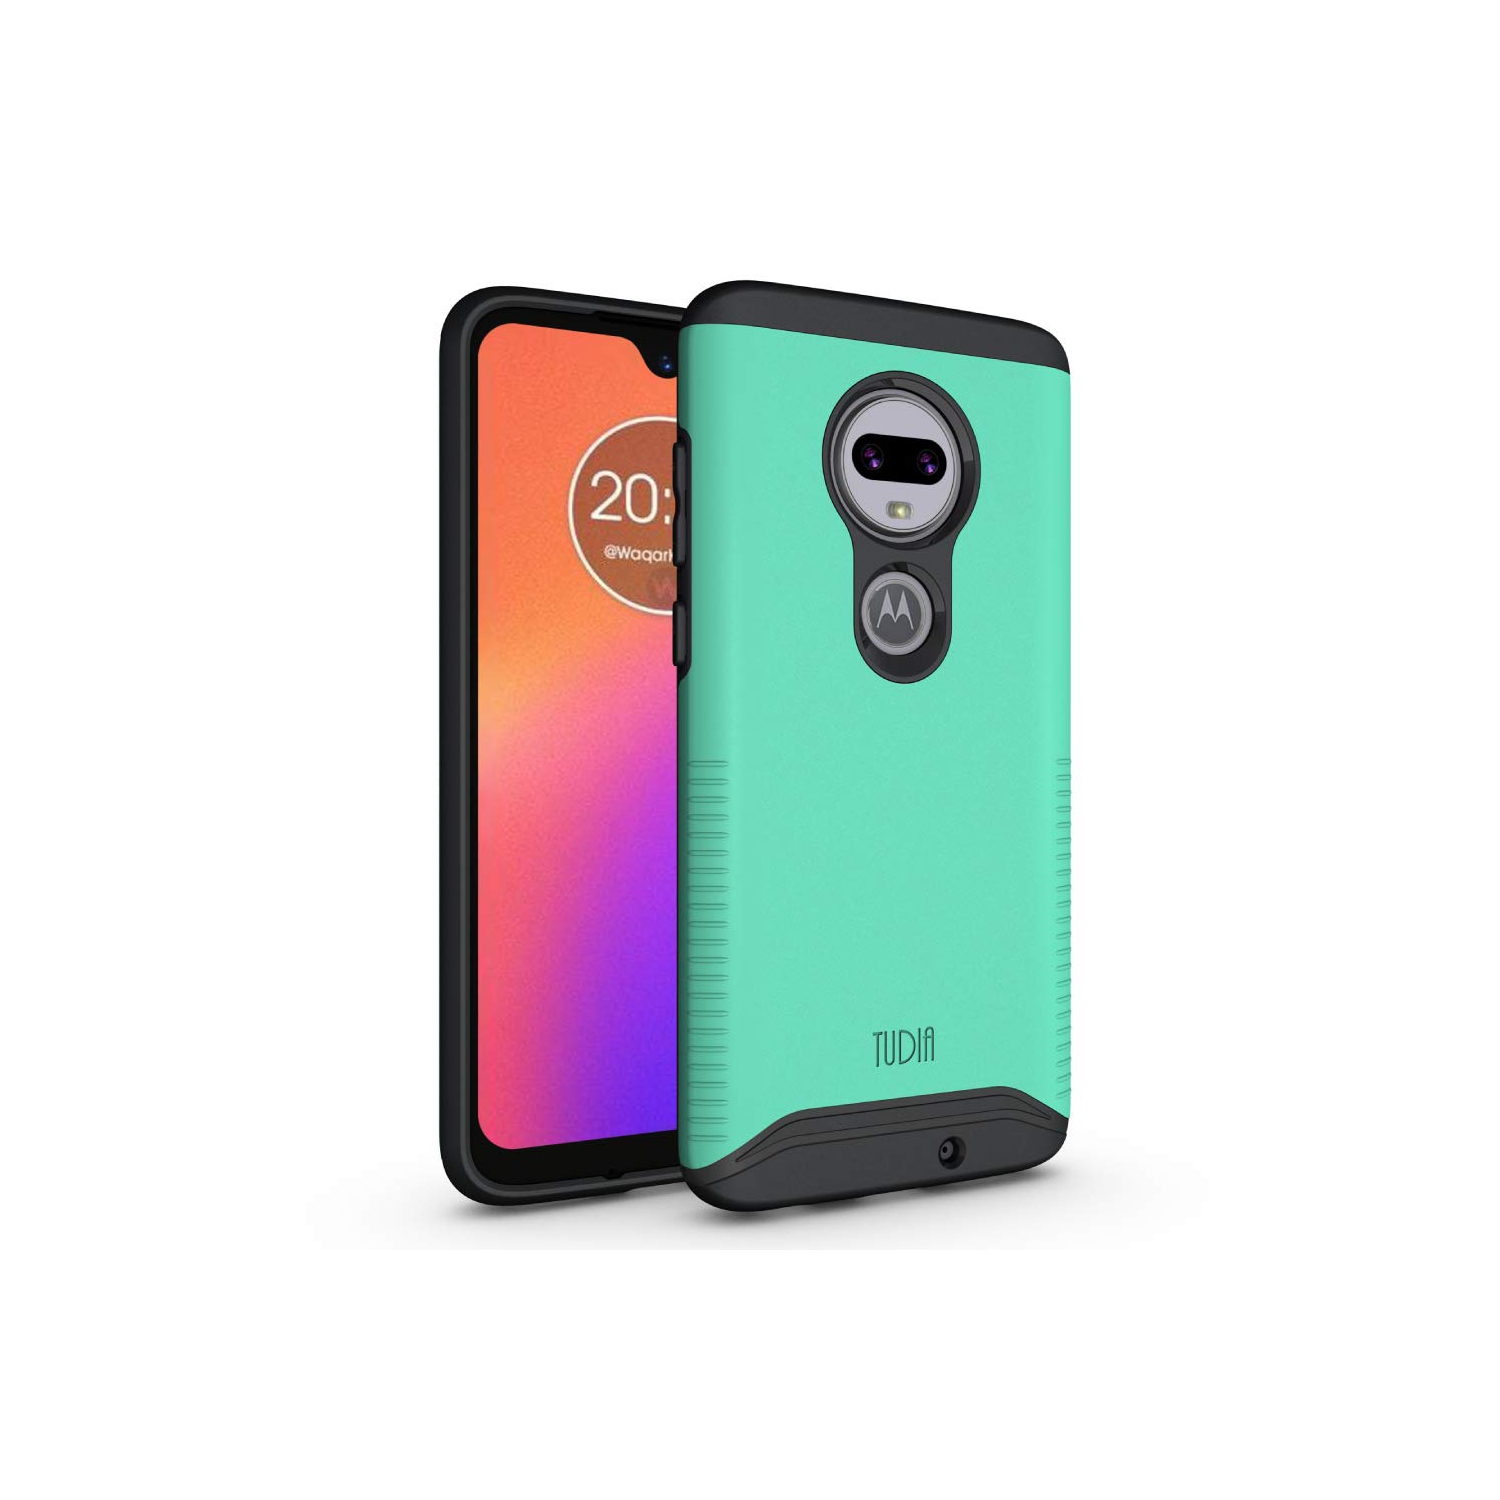 TUDIA Slim-Fit [Merge] Dual Layer Extreme Drop Protection/Rugged Phone Case for Motorola Moto G7/G7 Plus (Mint)